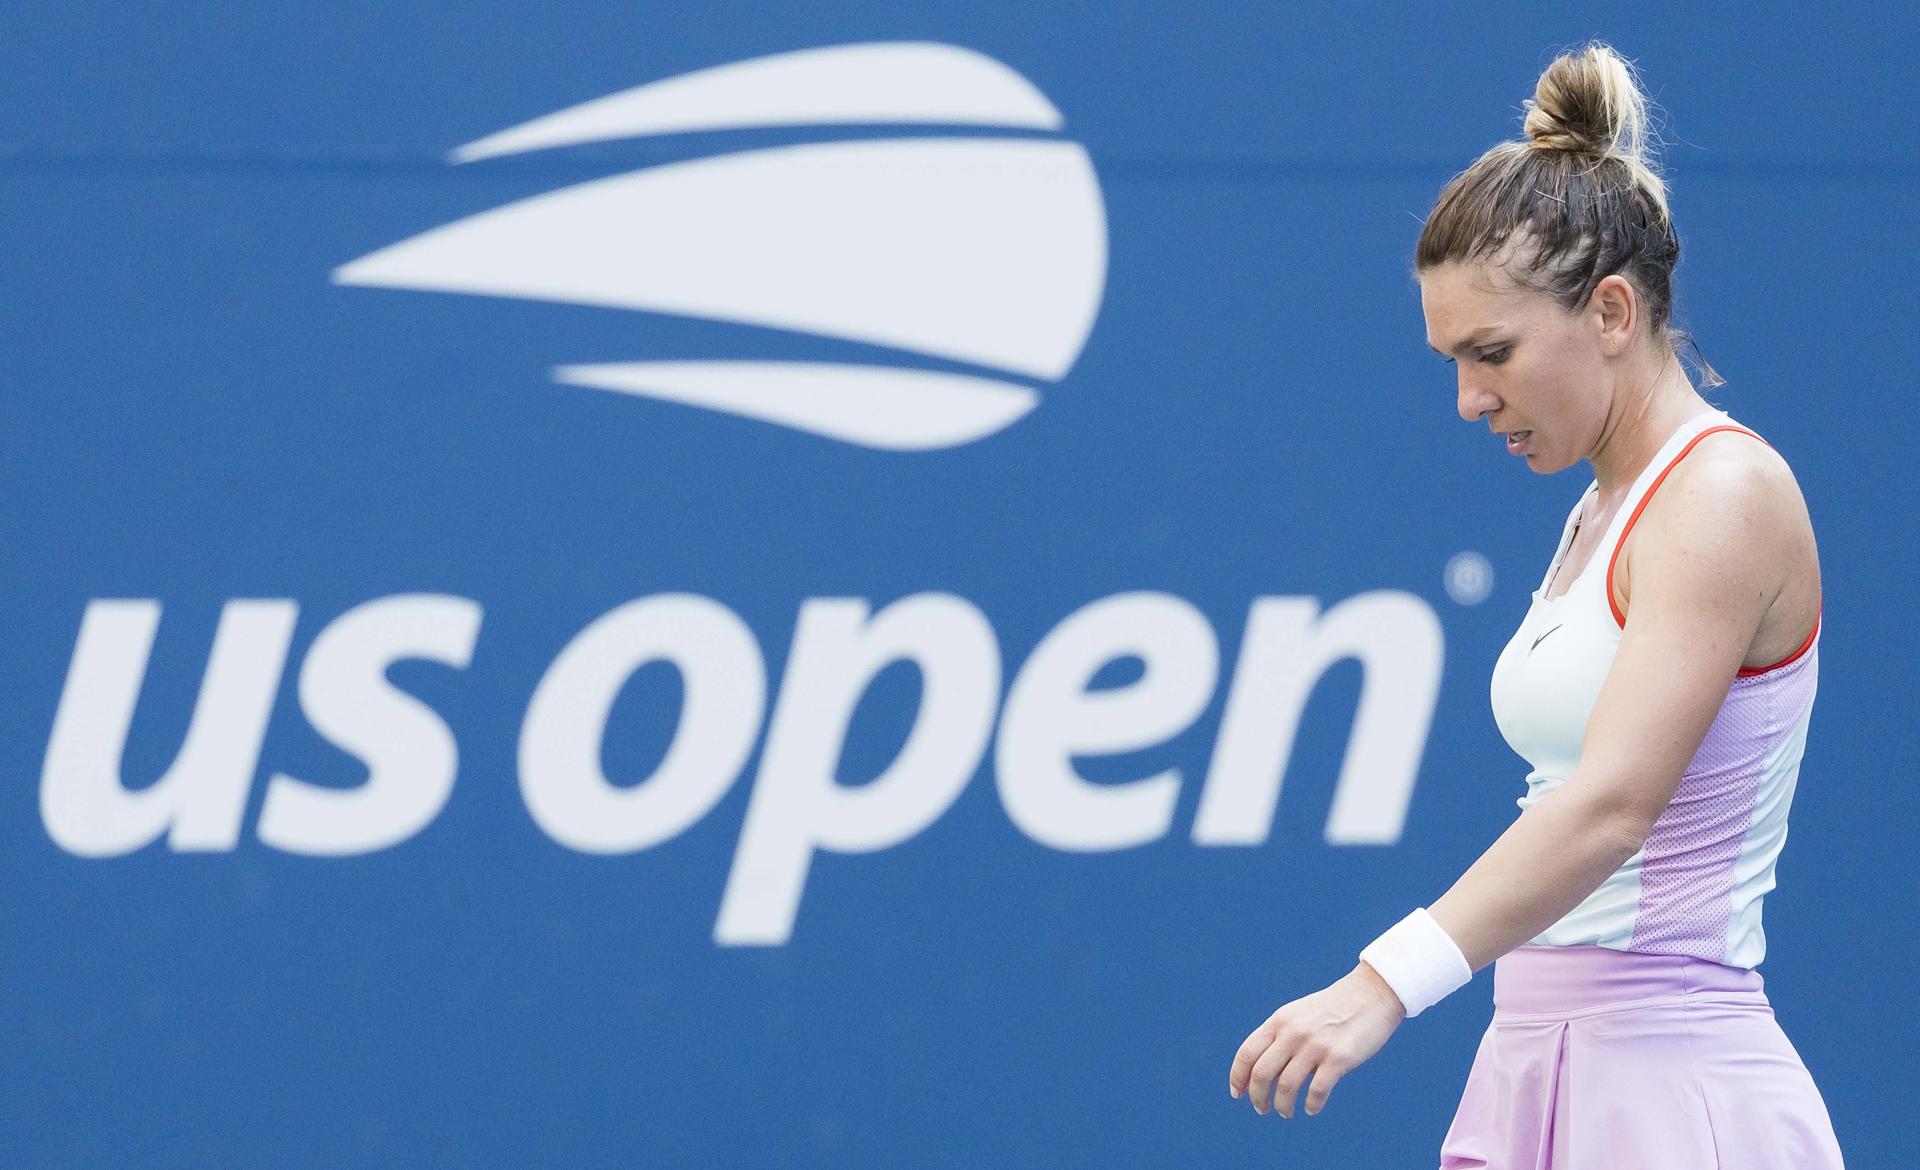 (FILE) - Simona Halep of Romania during her first round loss at the US Open Tennis Championships at the USTA National Tennis Center in the Flushing Meadows, New York, USA, 29 August 2022 (reissued 21 October 2022). (Tenis, Abierto, Rumanía, Estados Unidos, Nueva York) EFE/EPA/JUSTIN LANE *** Local Caption *** 57888350